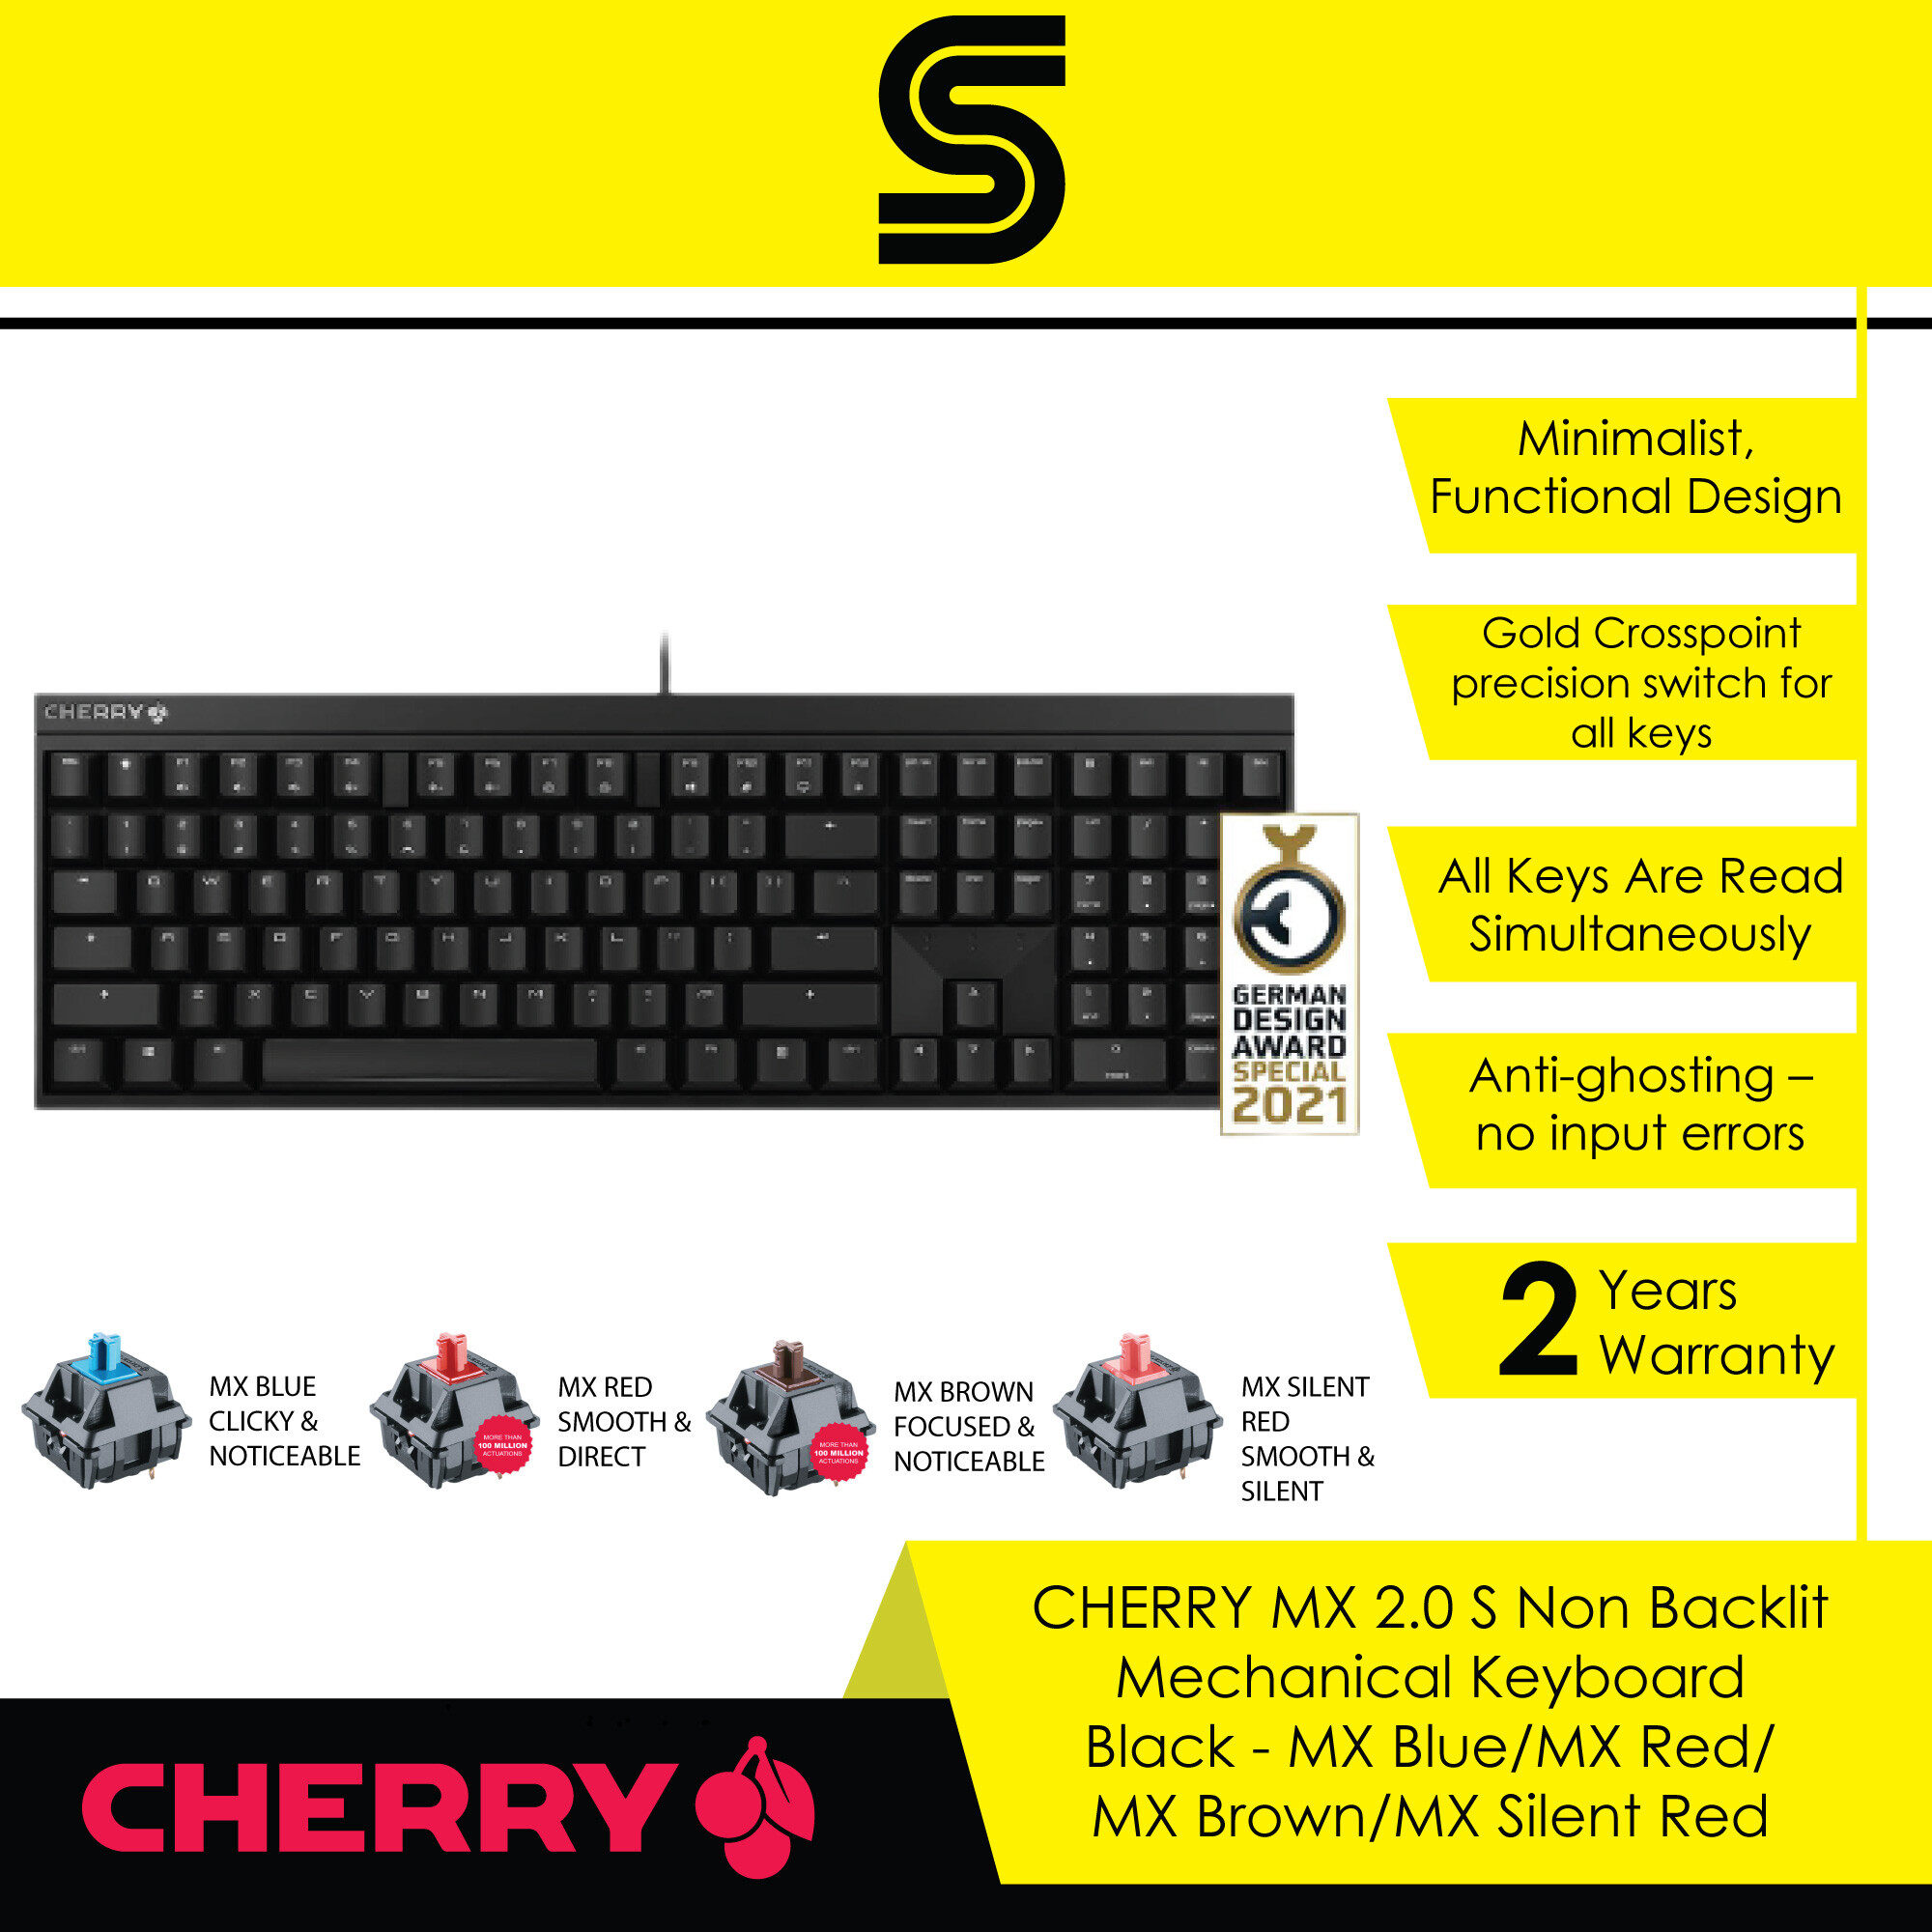 CHERRY MX 2.0S Non Backlit Mechanical Keyboard - Black - MX Blue/MX Red/MX Brown/MX Silent Red